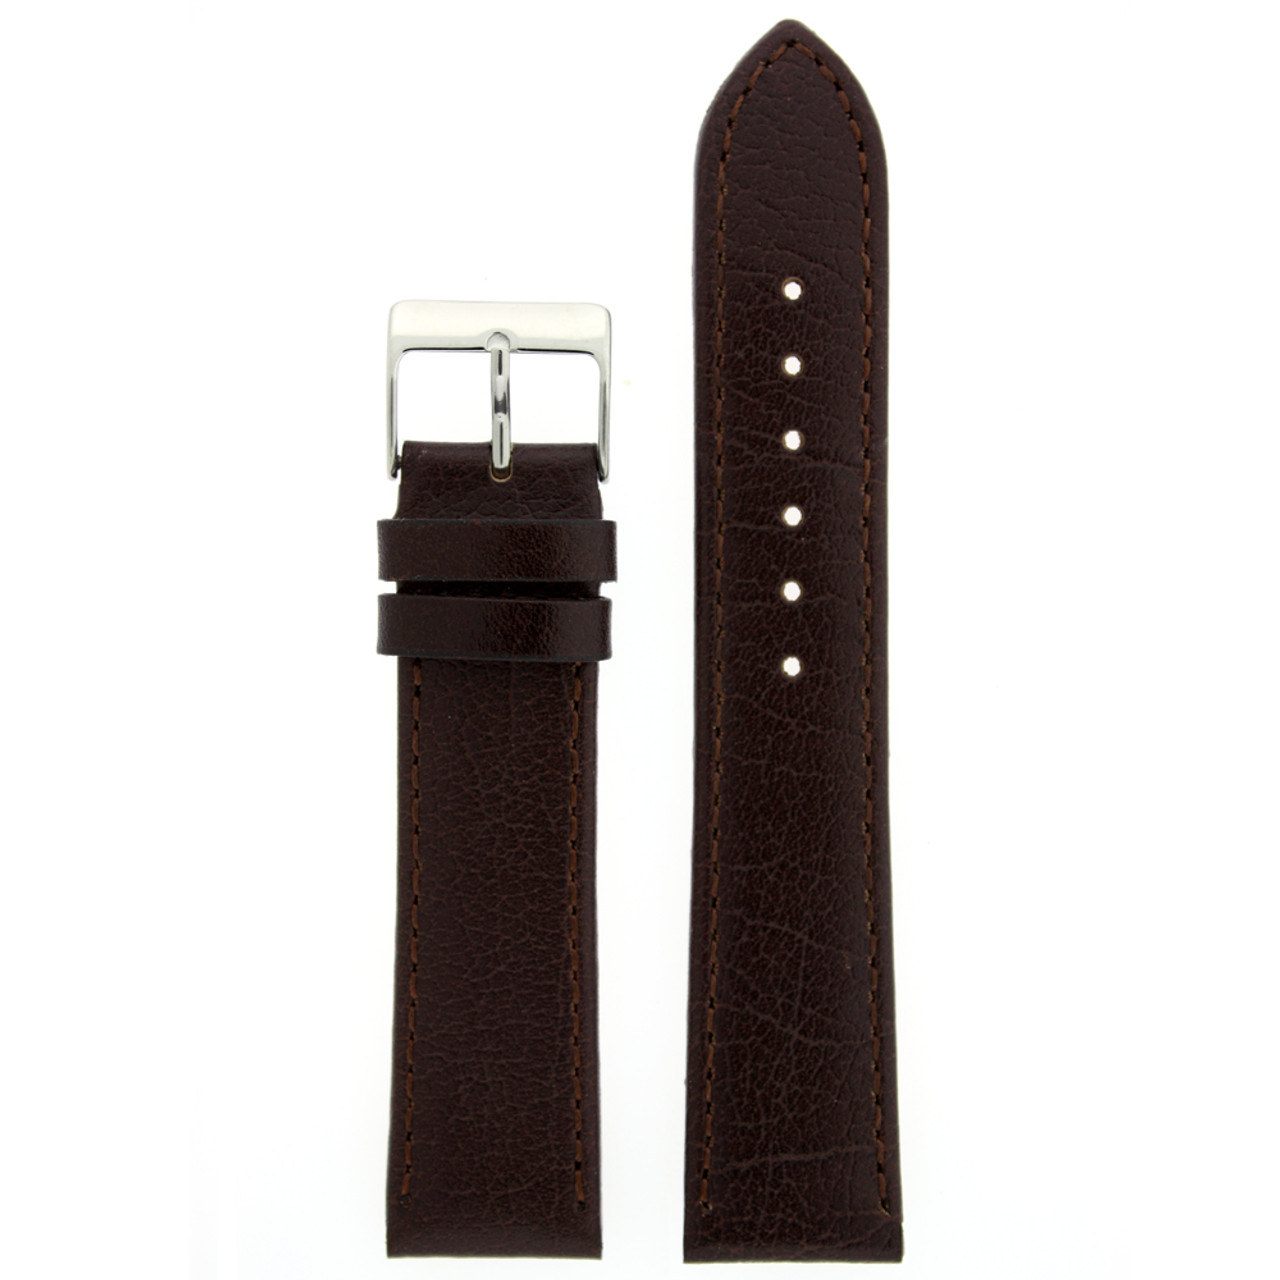 Calfskin Leather Band in Dark Brown Watch Parts Tools